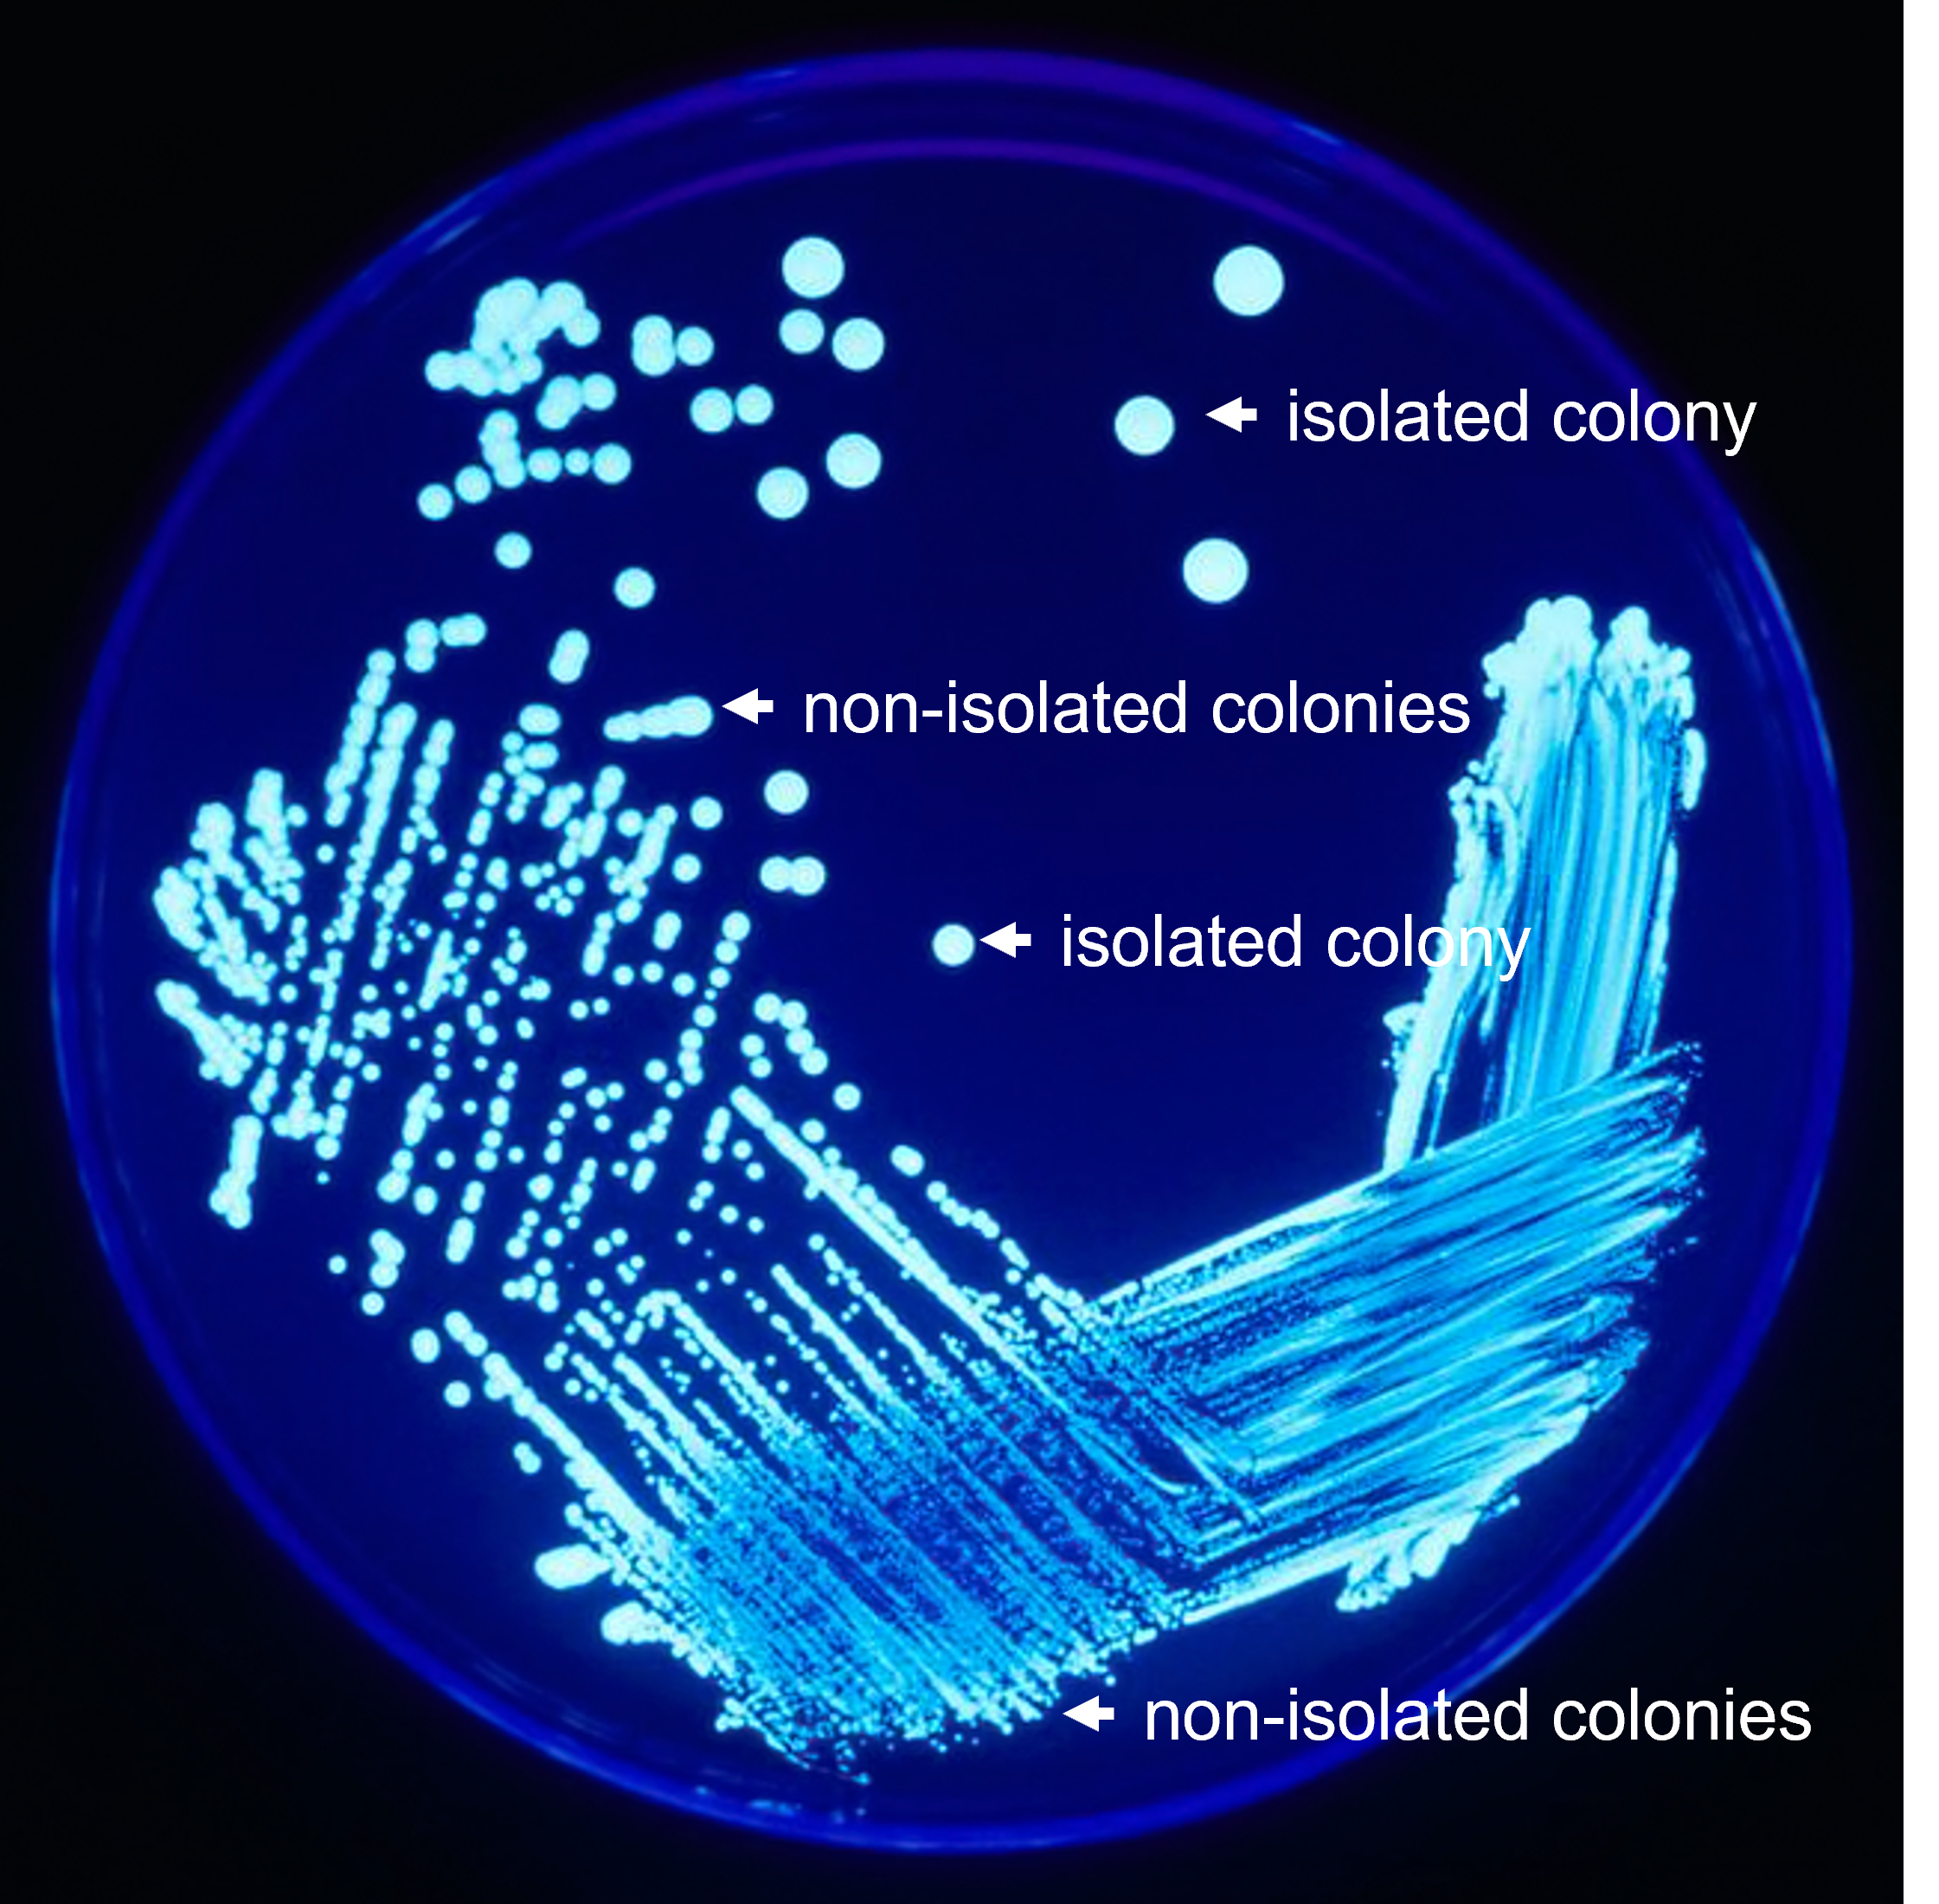 isolated and non-isolated colonies